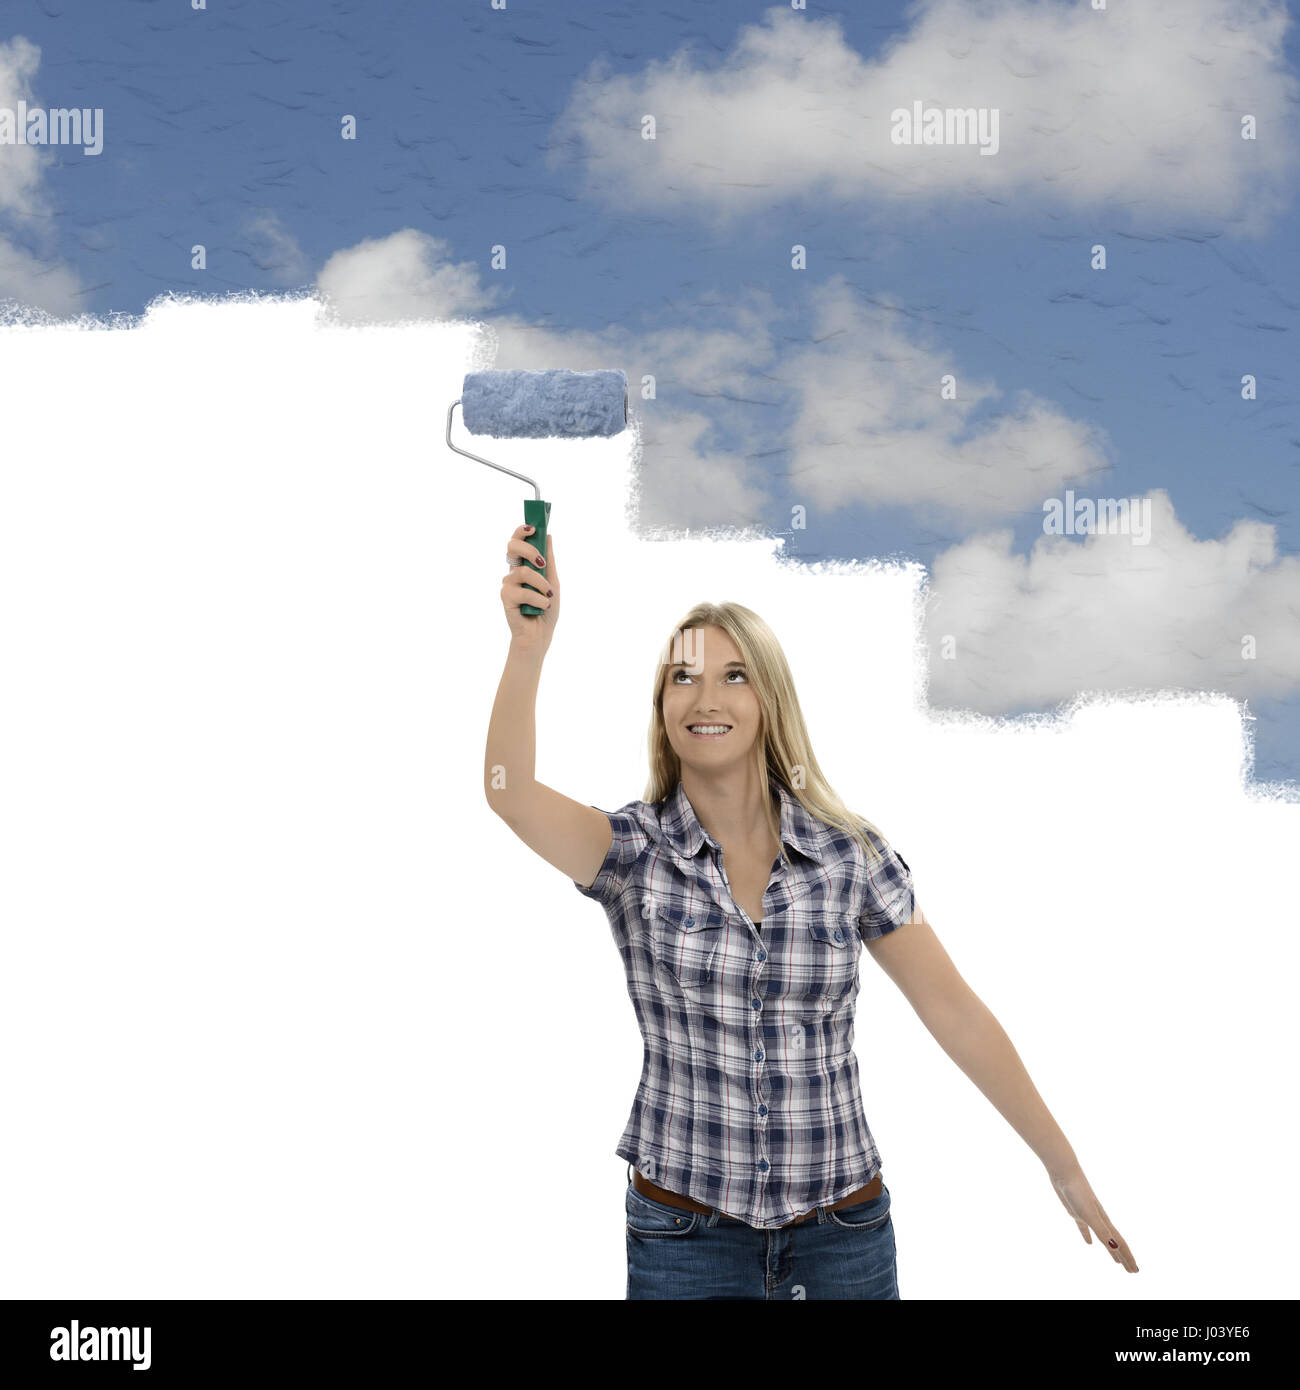 Woman painting decorating tranquil sky with clouds Stock Photo